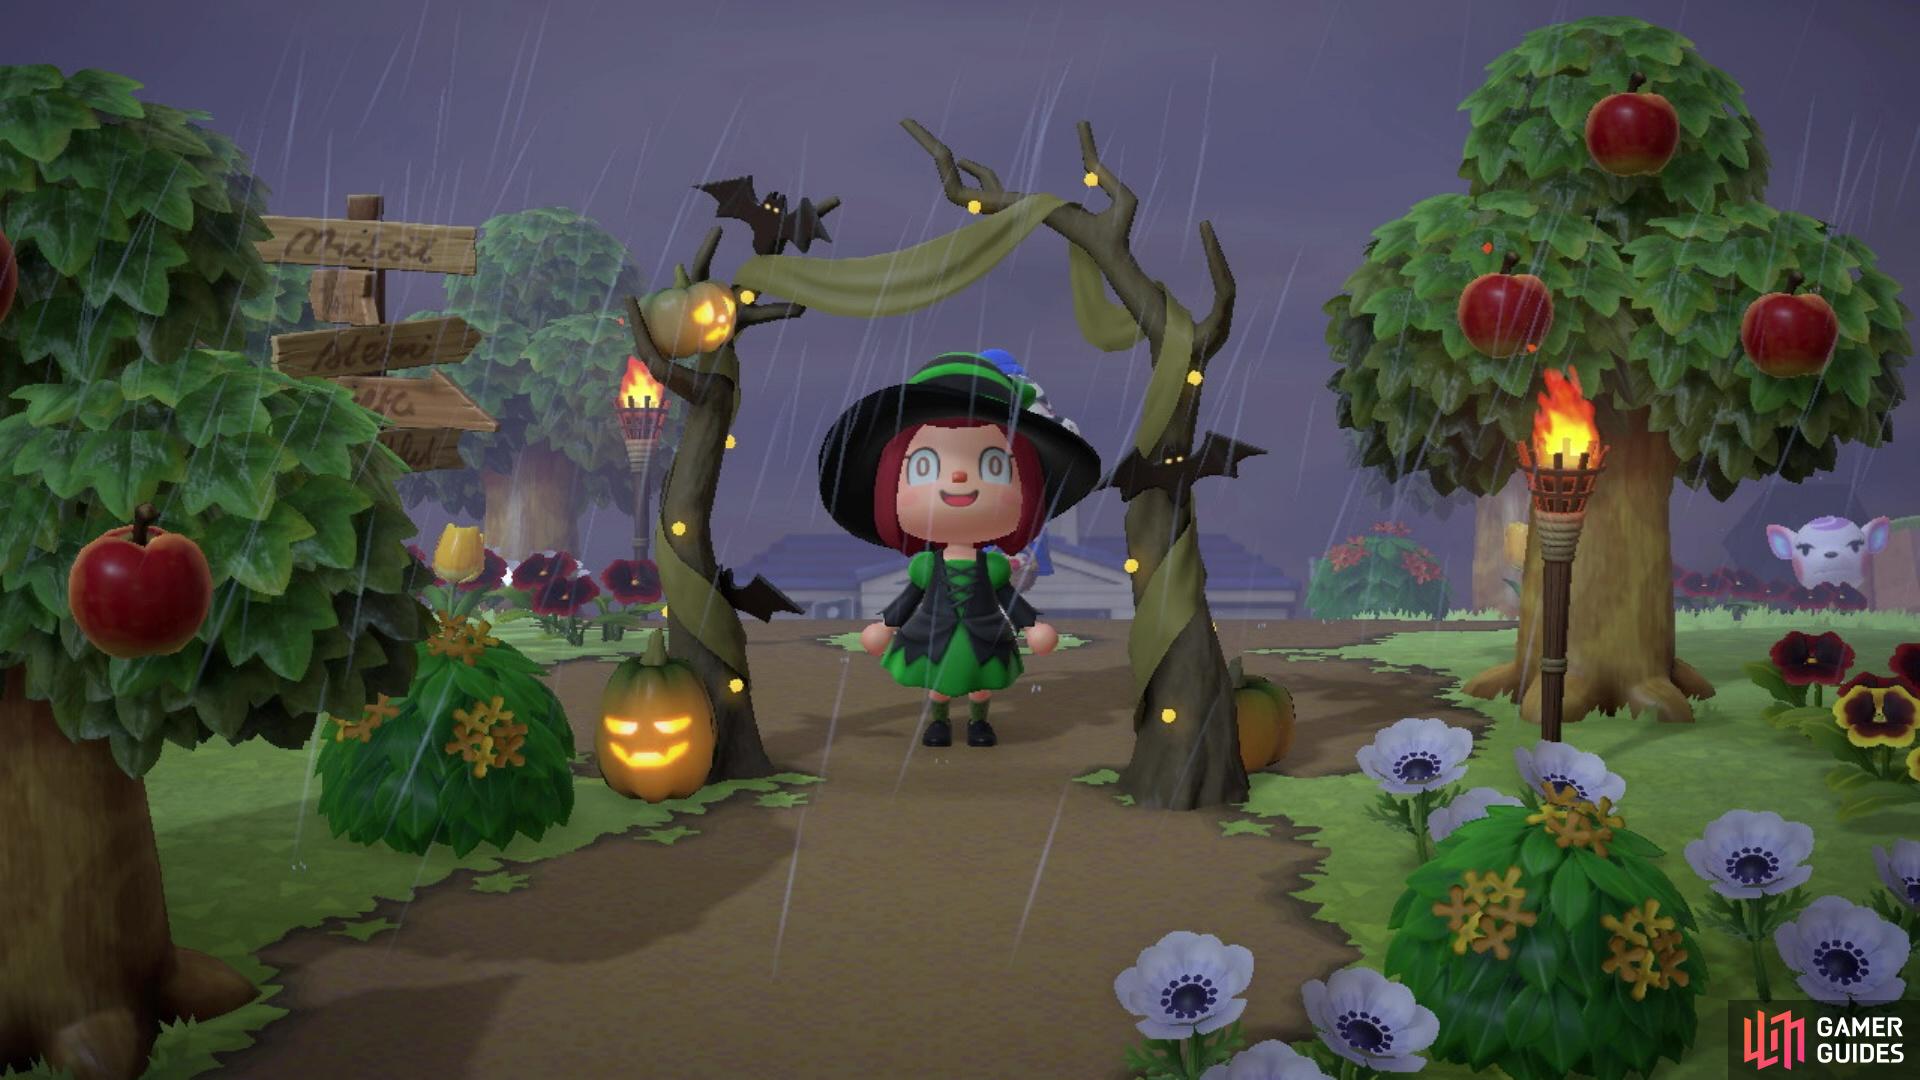 It’s Halloween! Time to get spooky!